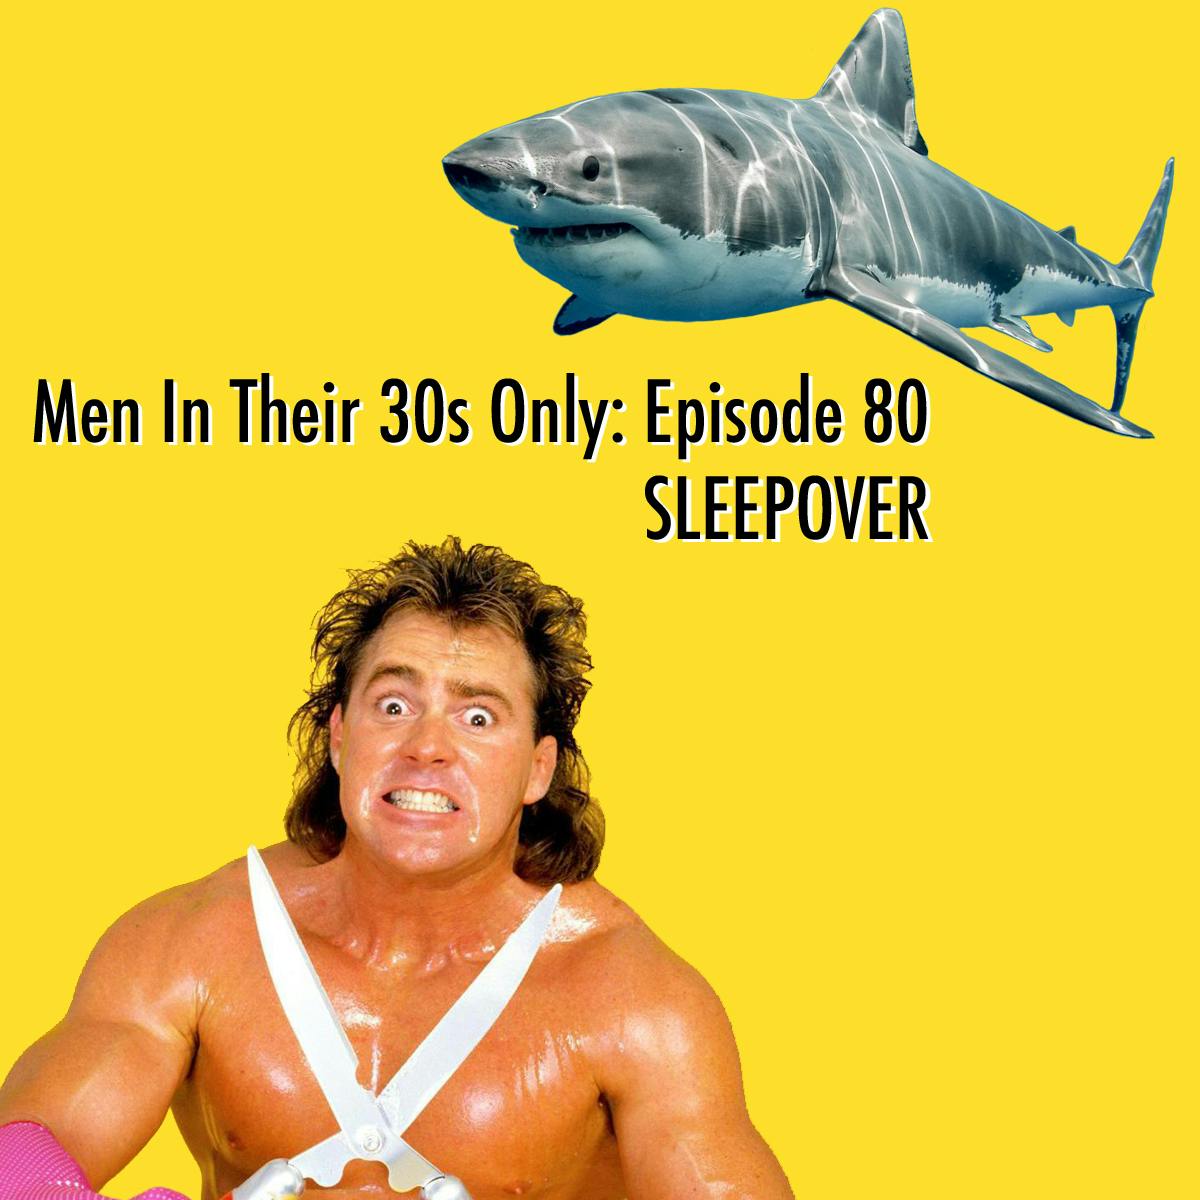 Men In Their 30s Only - Sleepover